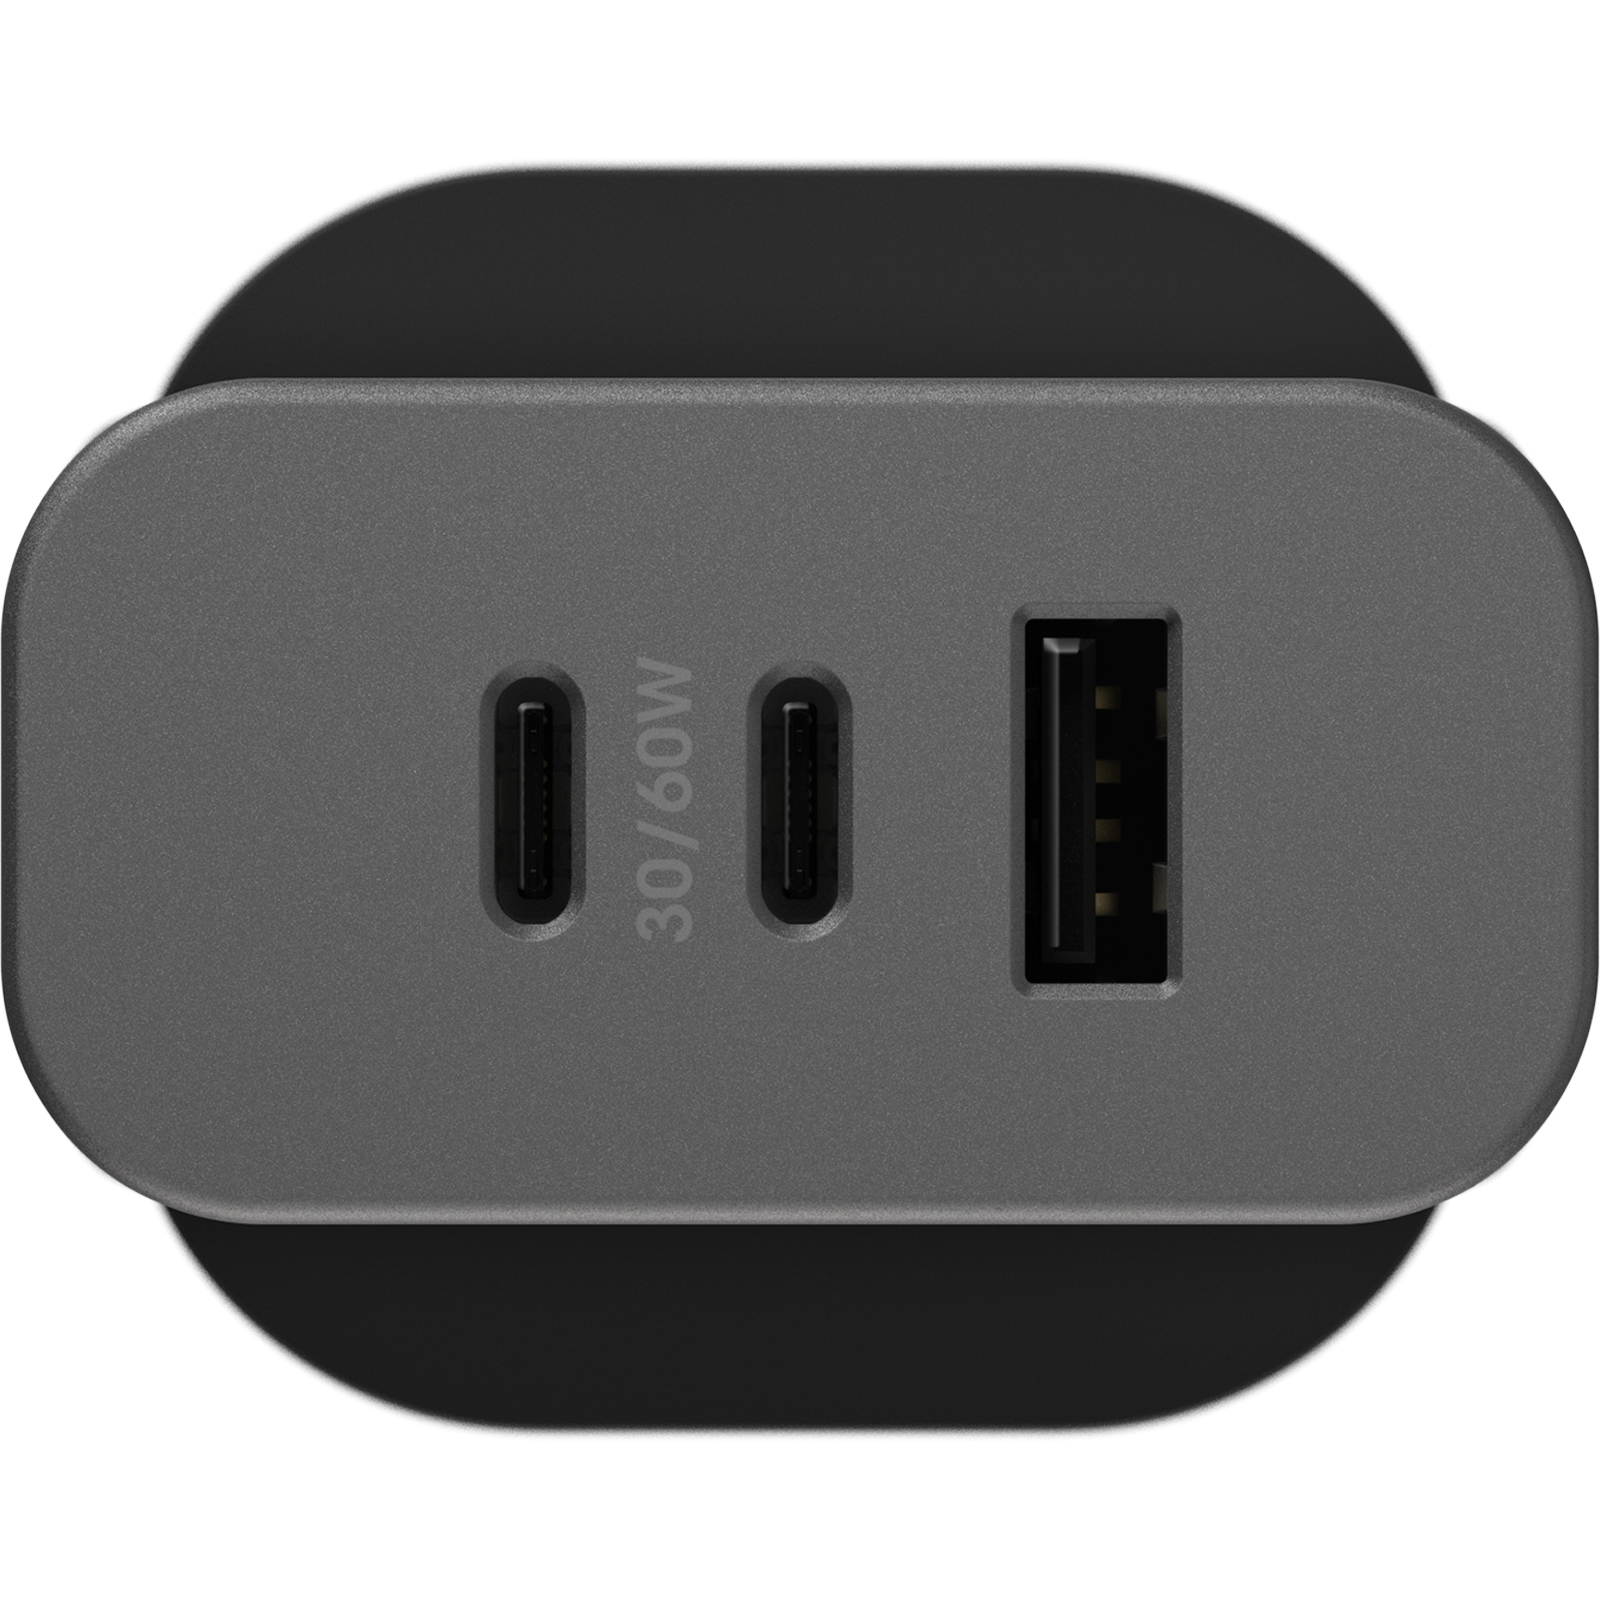 OtterBox Premium Pro 3-Port 72W GaN Wall Charger (Nightshade), , large image number 2